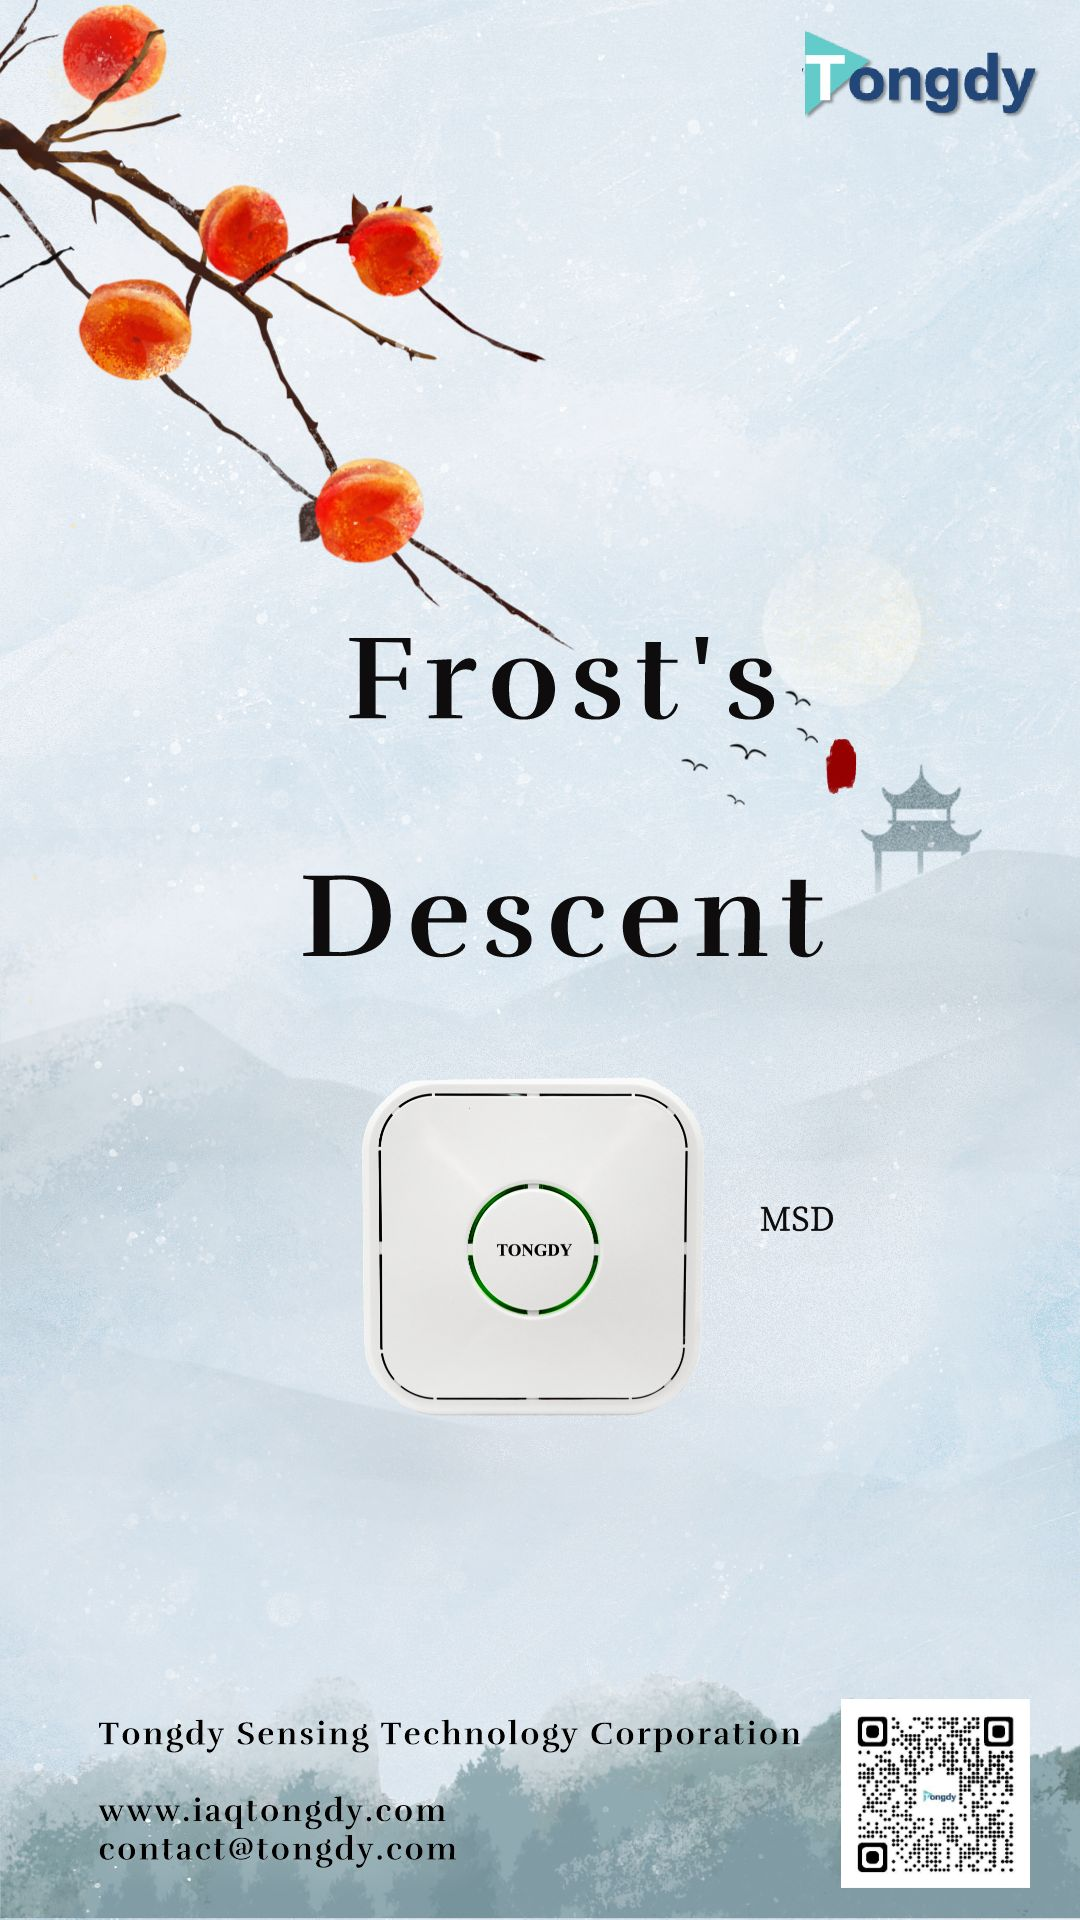 Frost’s Descent